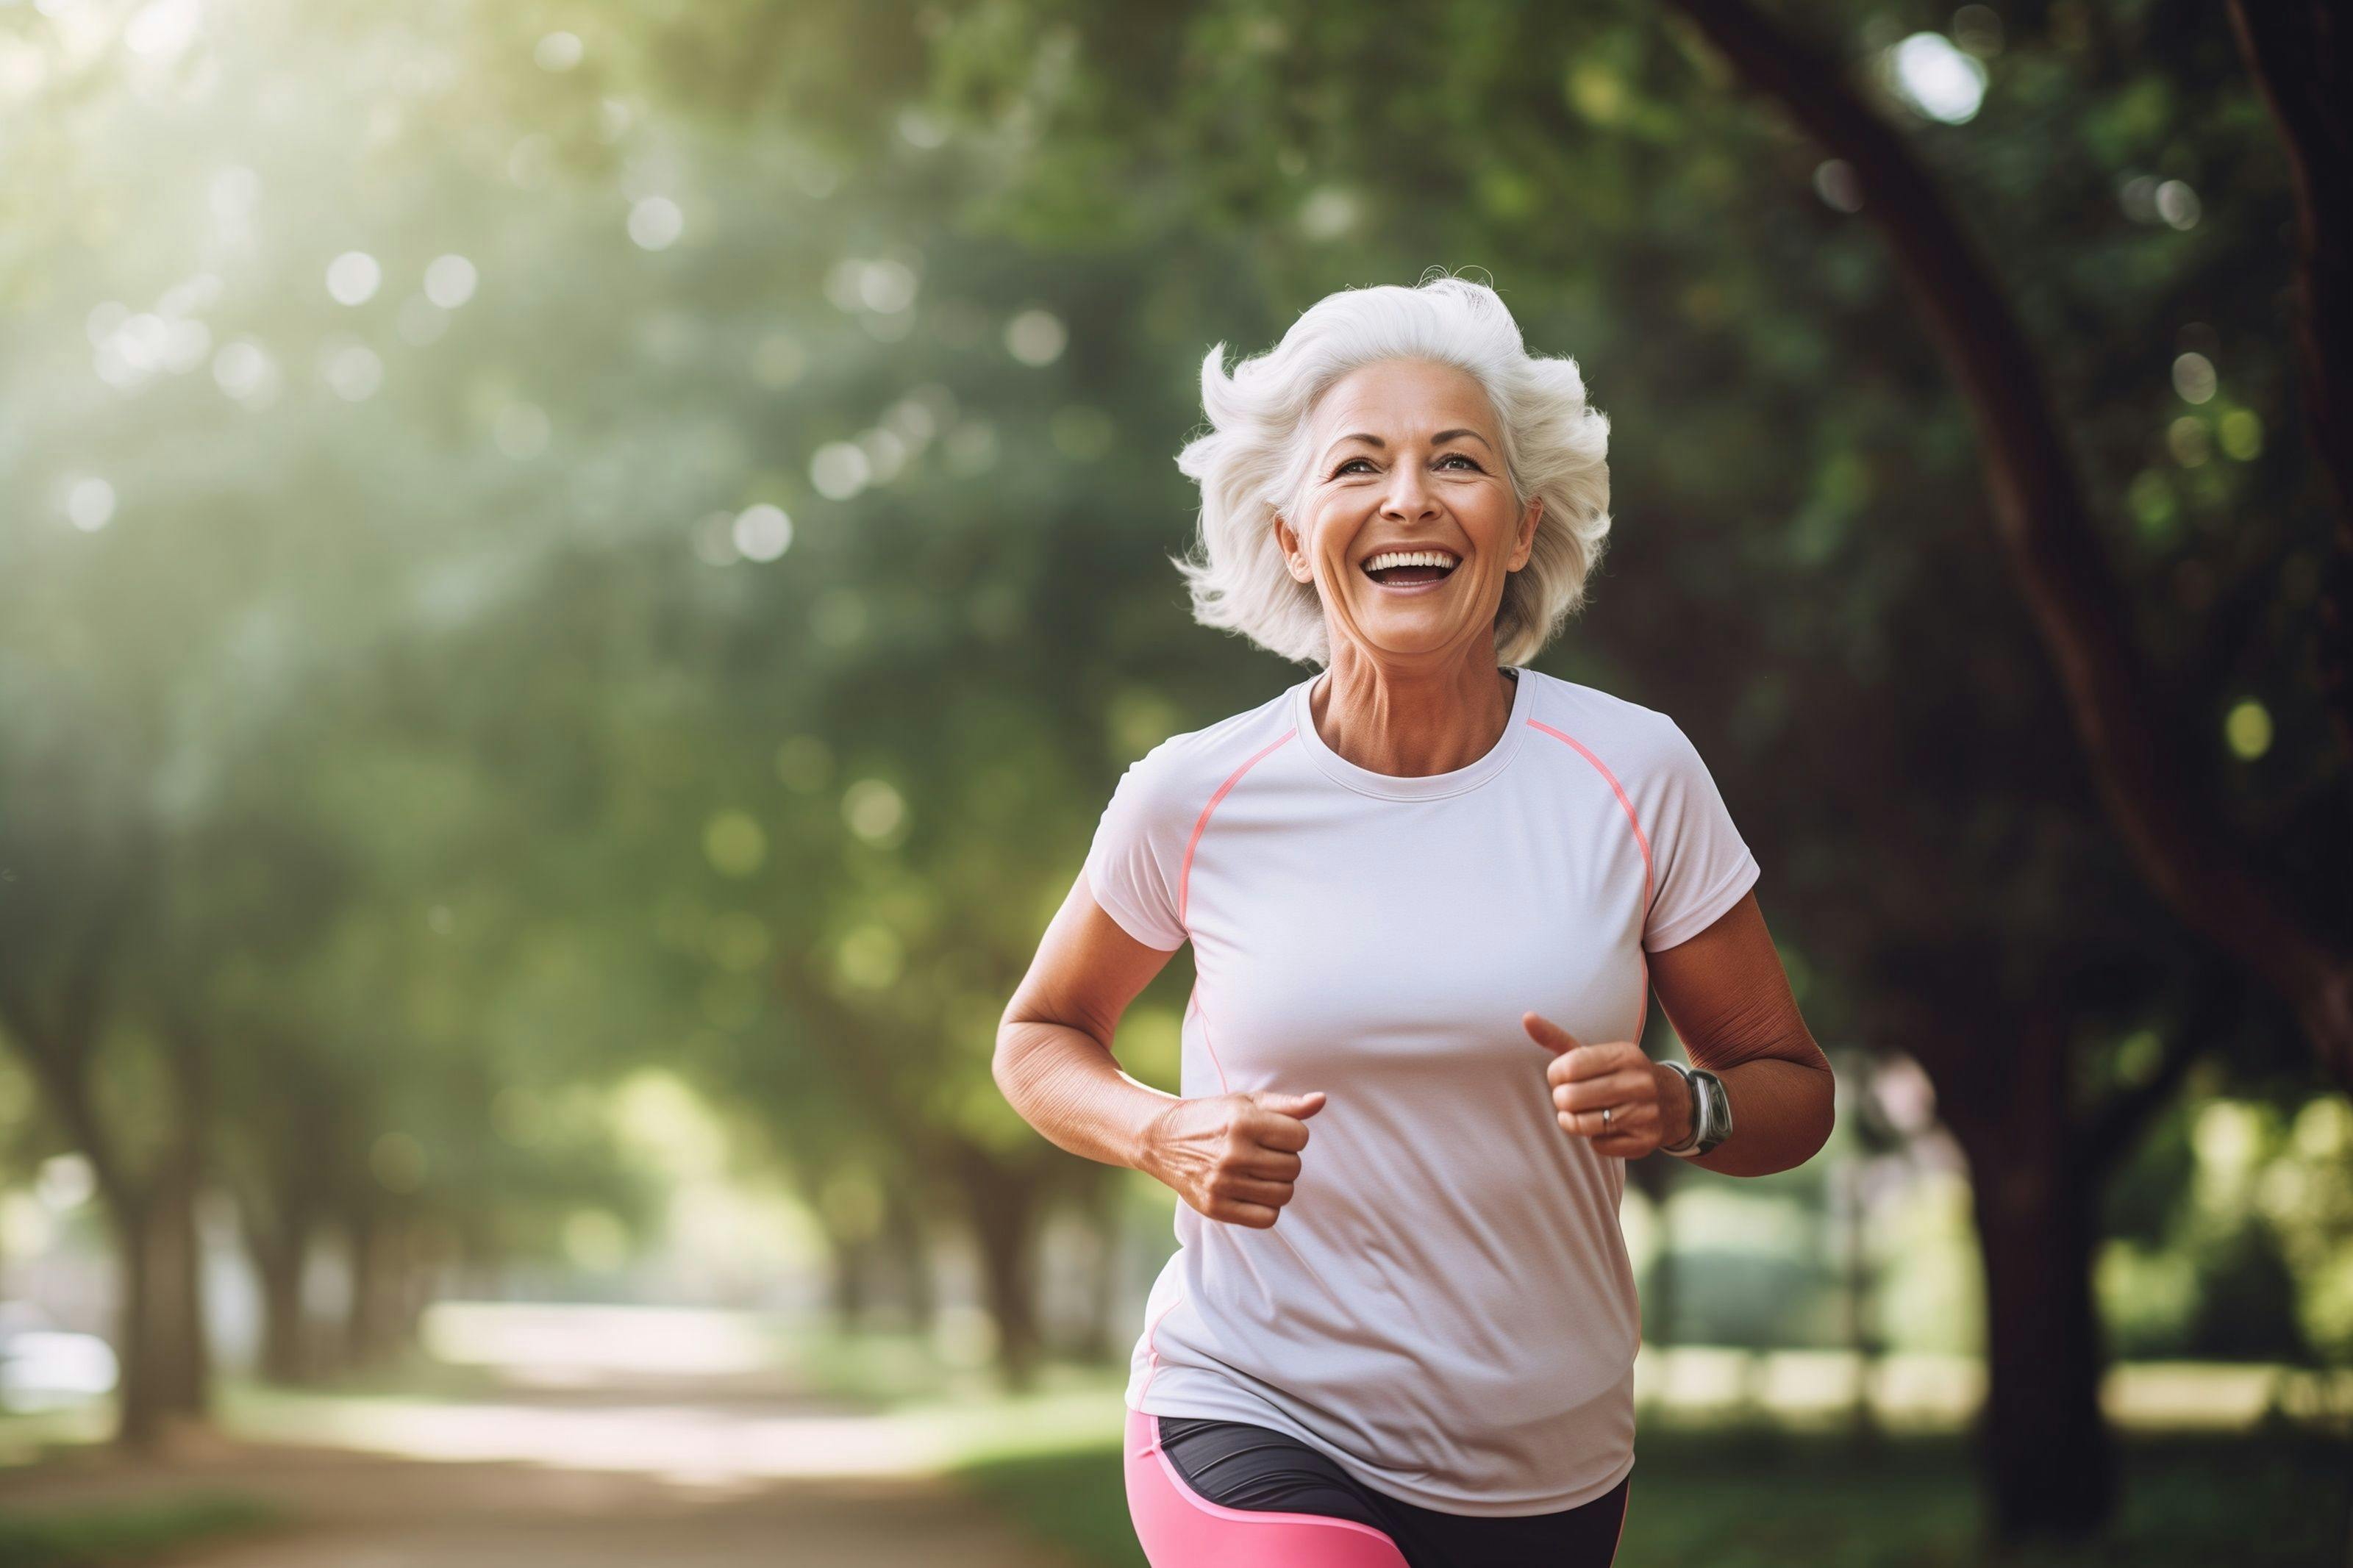 The Relationship Between Physical Activity, Temperature and Hot Flashes During Menopause